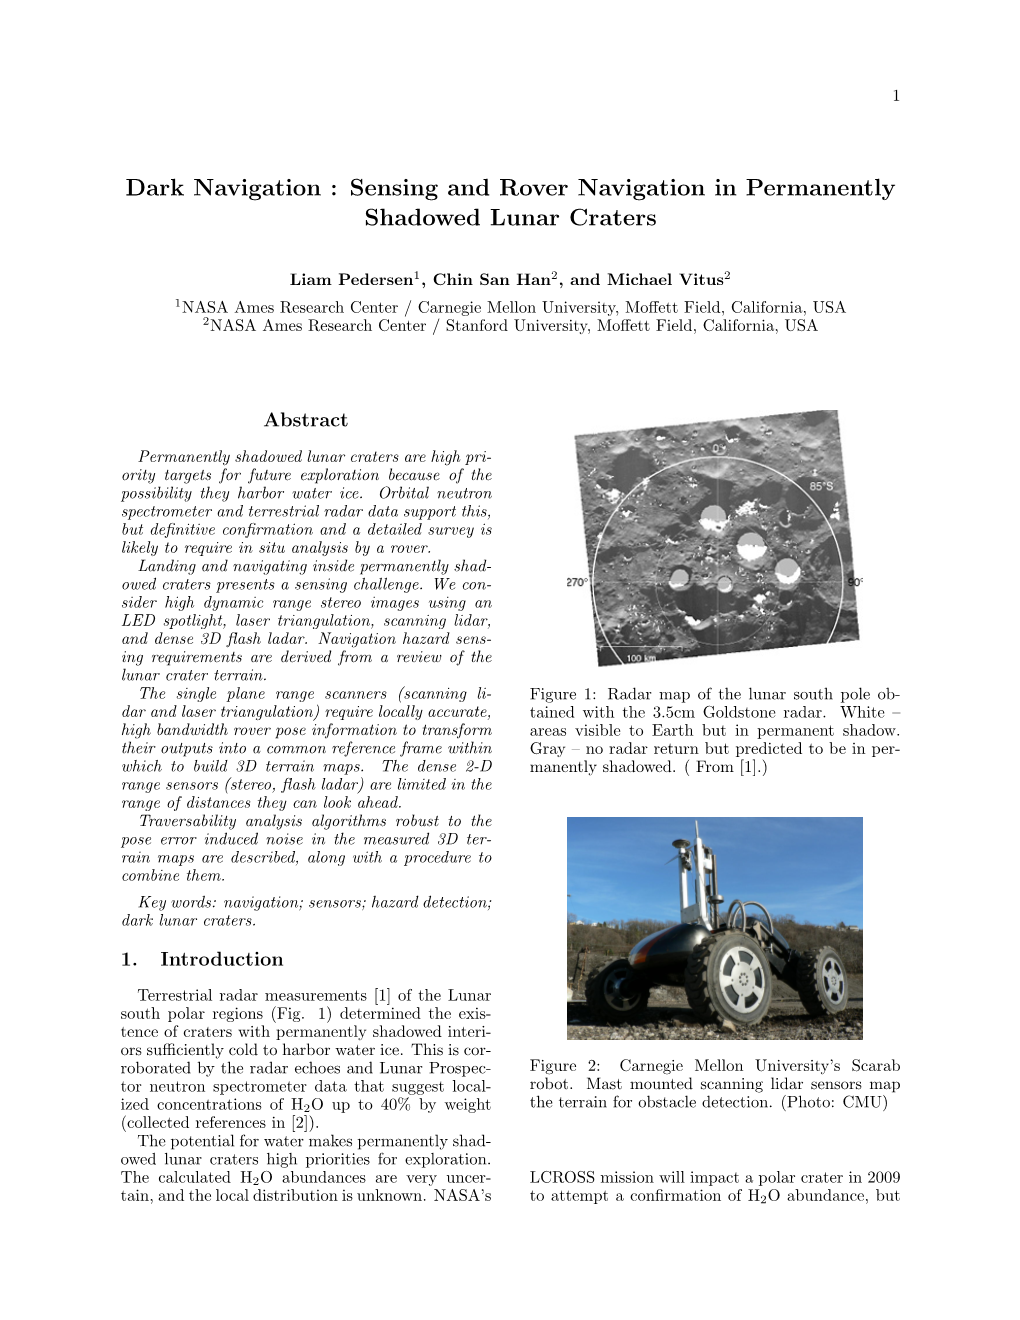 Sensing and Rover Navigation in Permanently Shadowed Lunar Craters